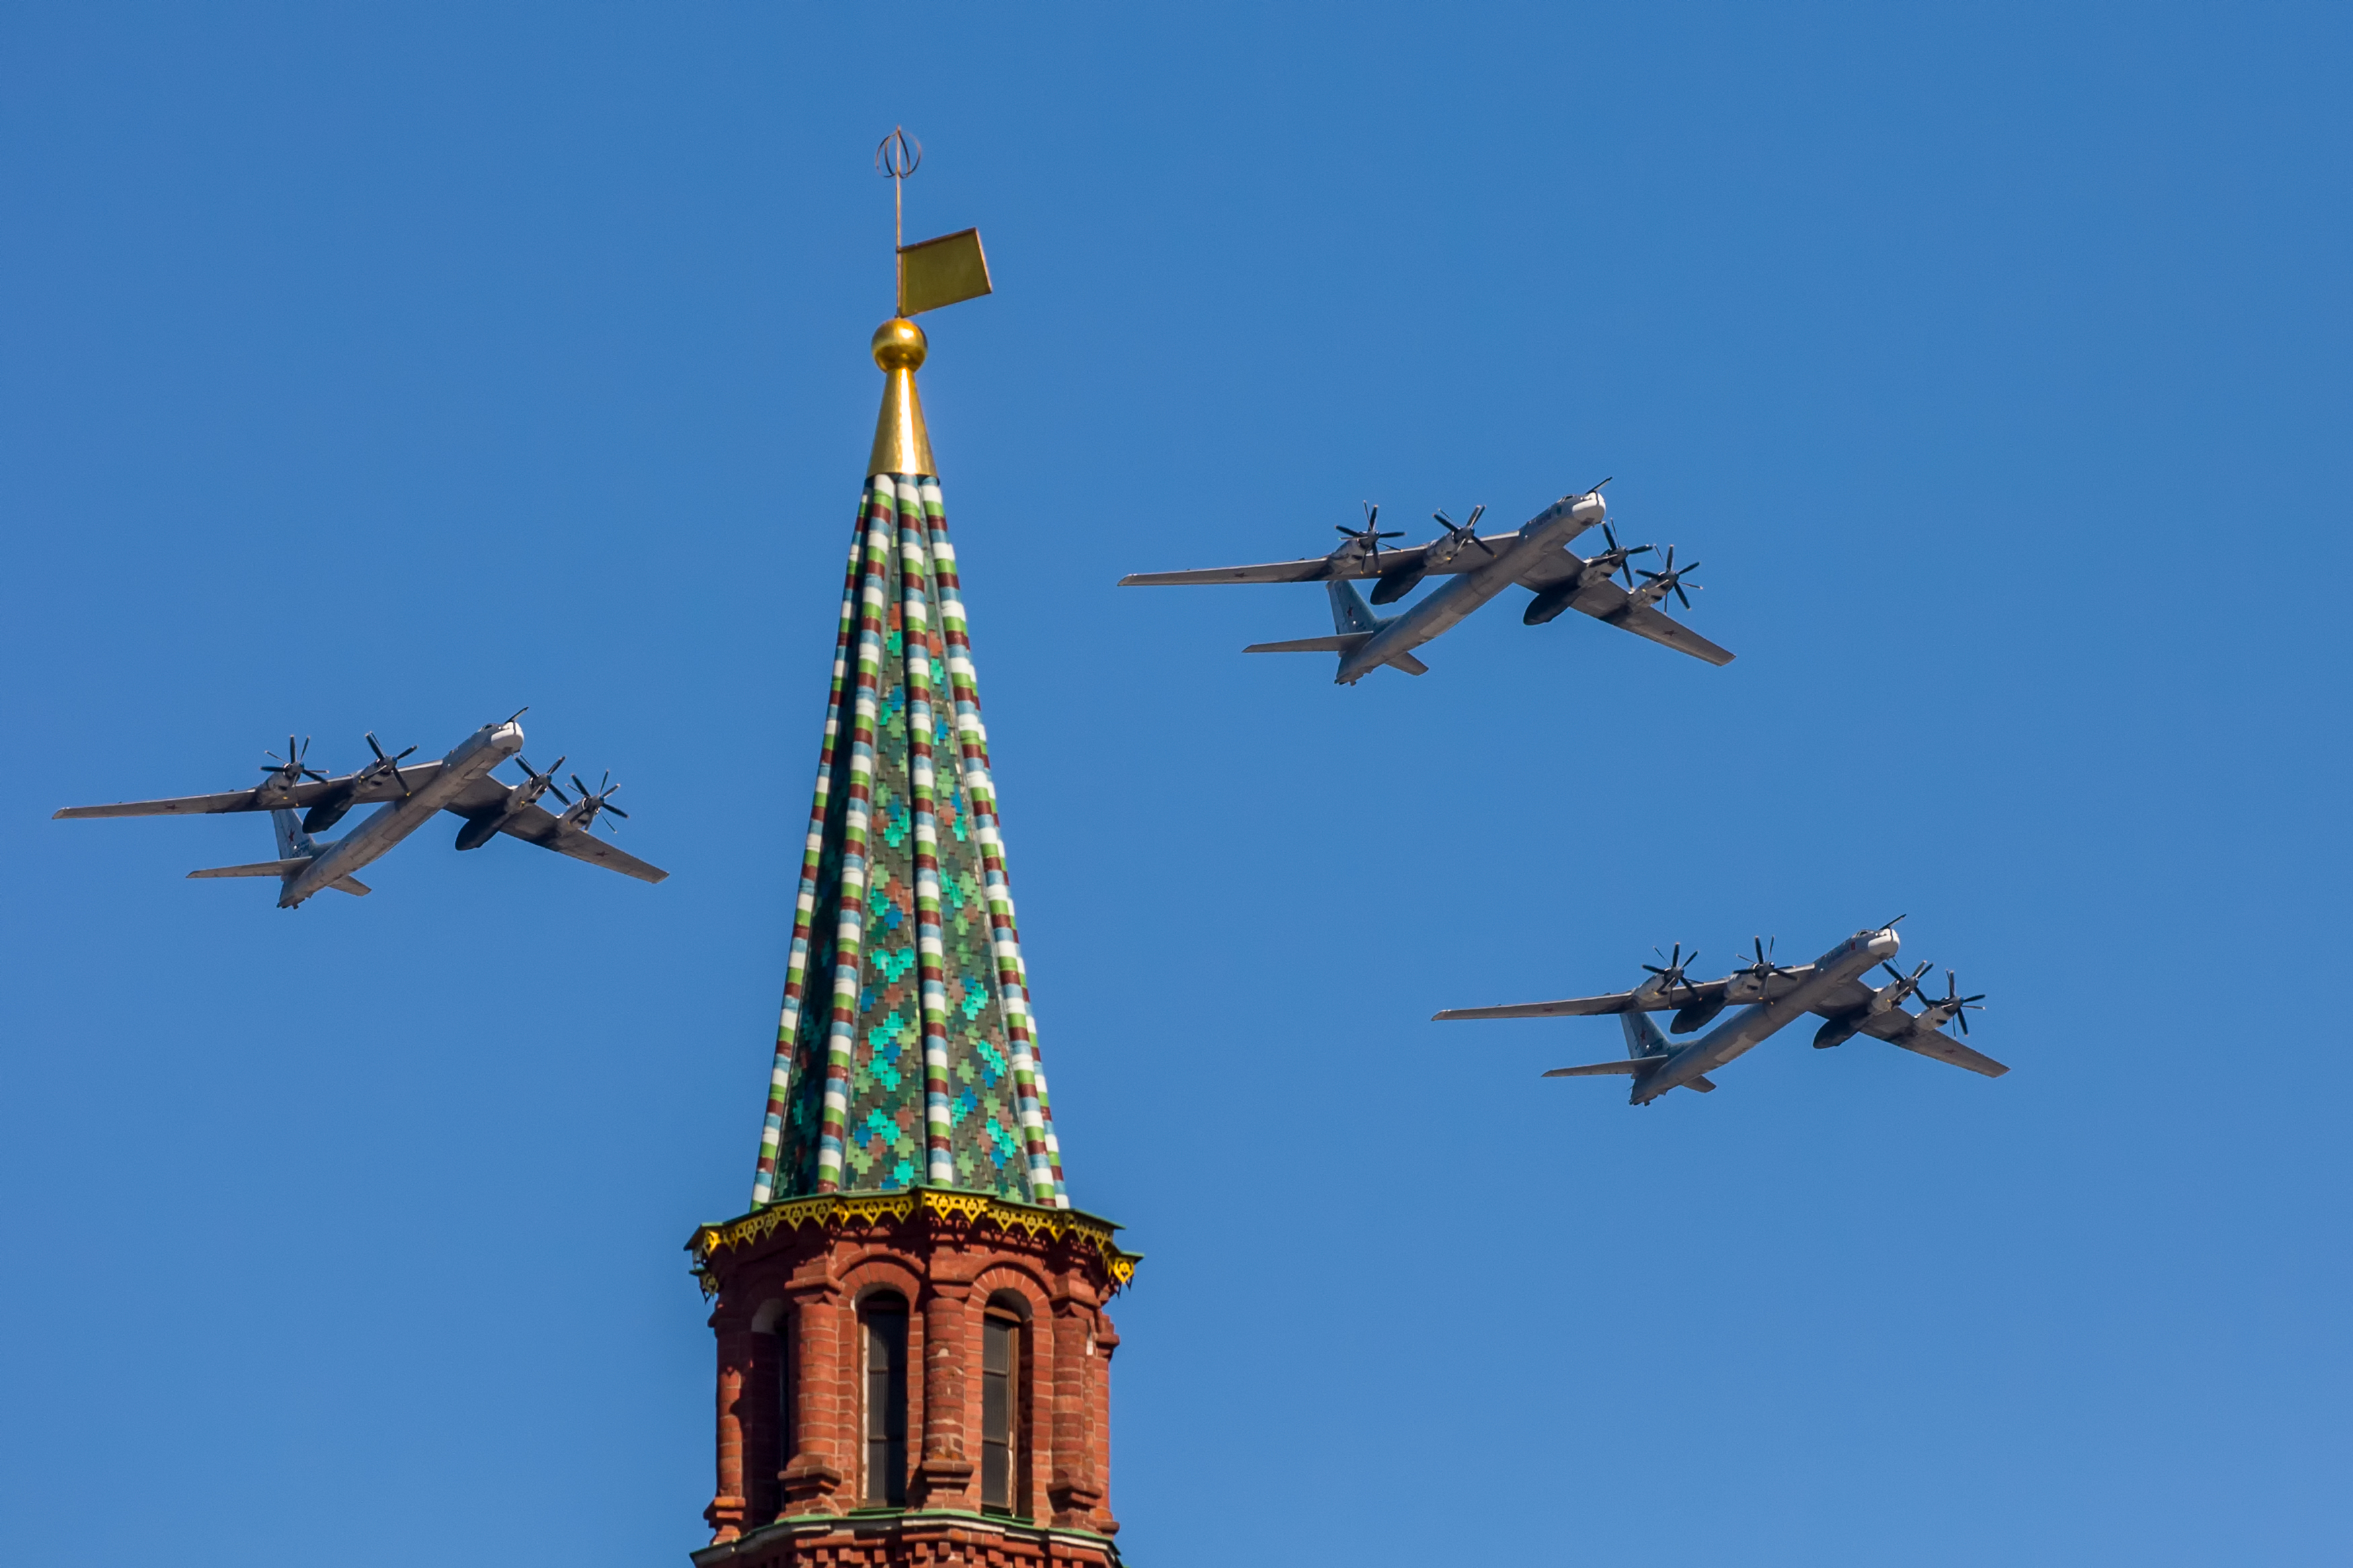 [UNVERIFIED CONTENT] Military Parade repetition,Red Square, Moscow, Russia. Tu-95 (NATO reporting name: Bear) is a large, four-engine turboprop-powered strategic bomber and missile platform